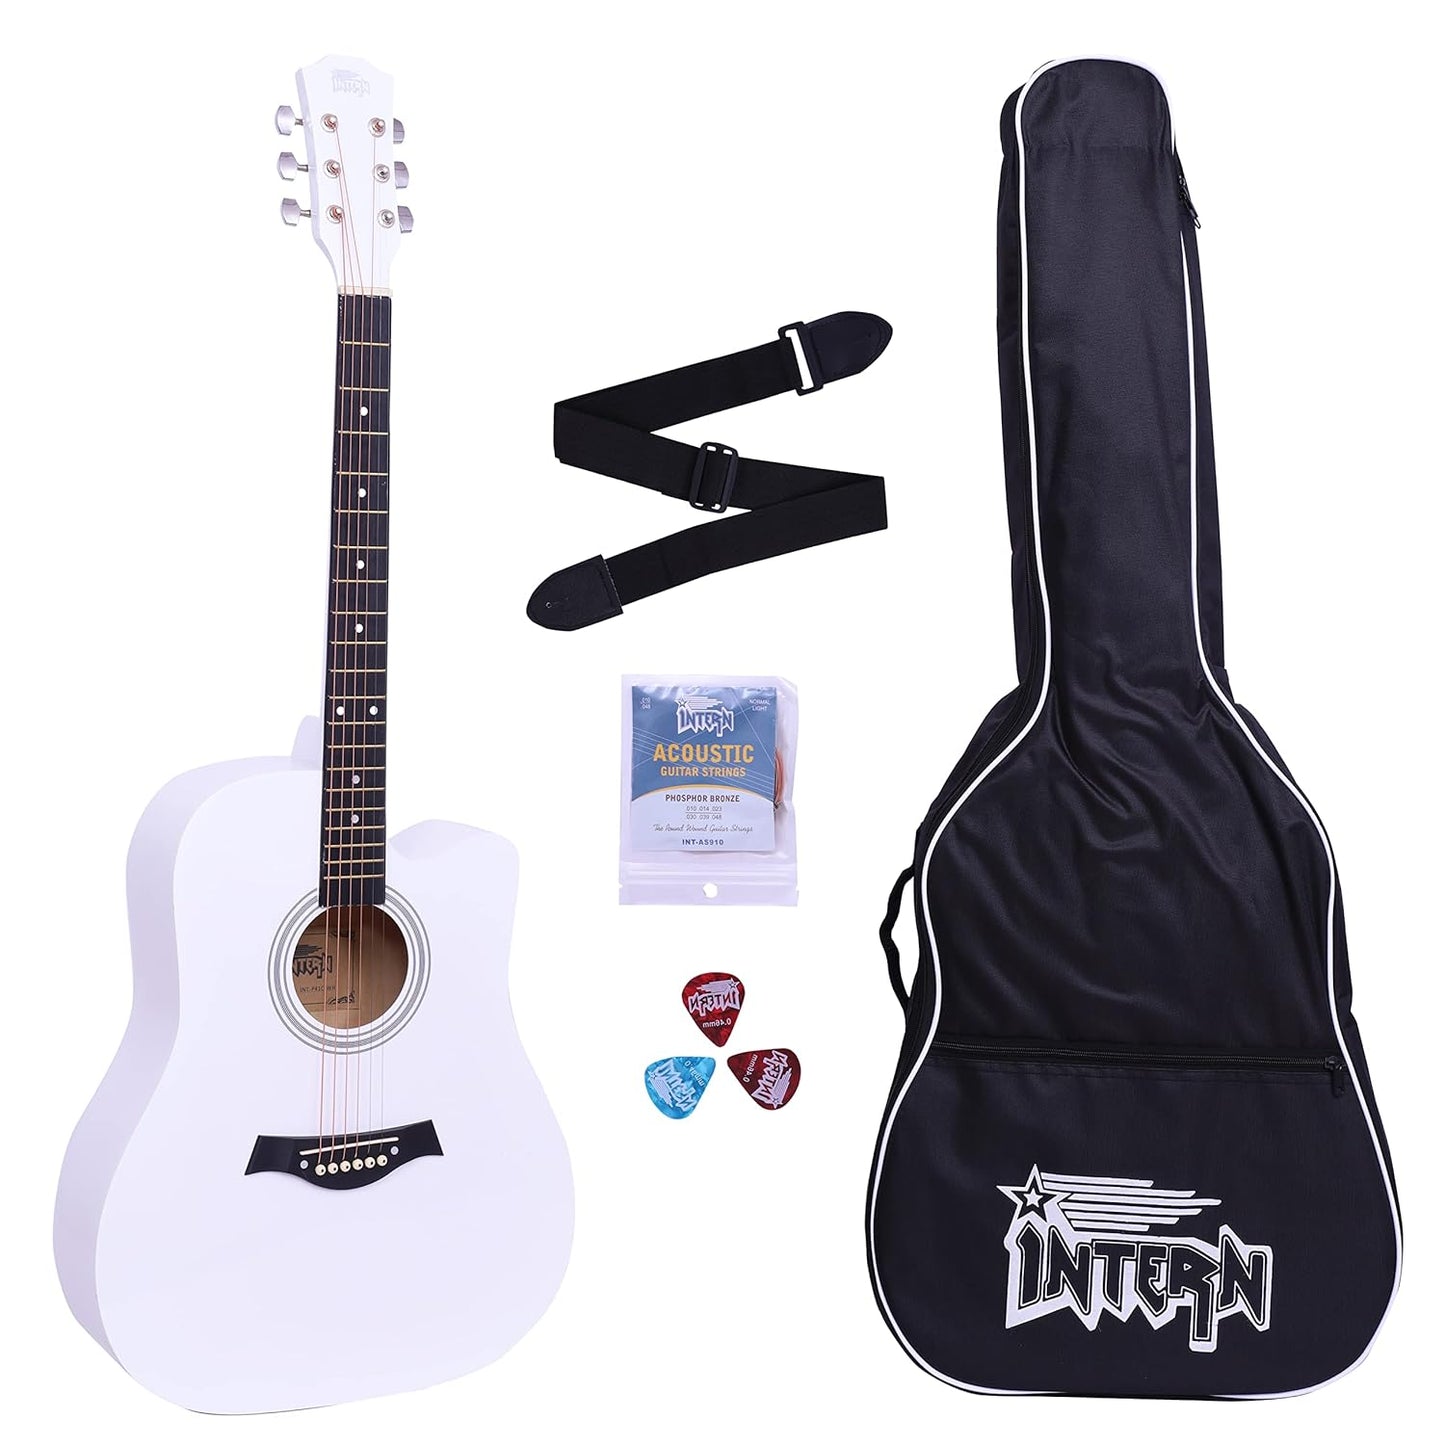 INTERN 41 inches Acoustic Guitar with truss rod. Includes carry bag, strings pack, strap & plectrums. Premium Wooden durable